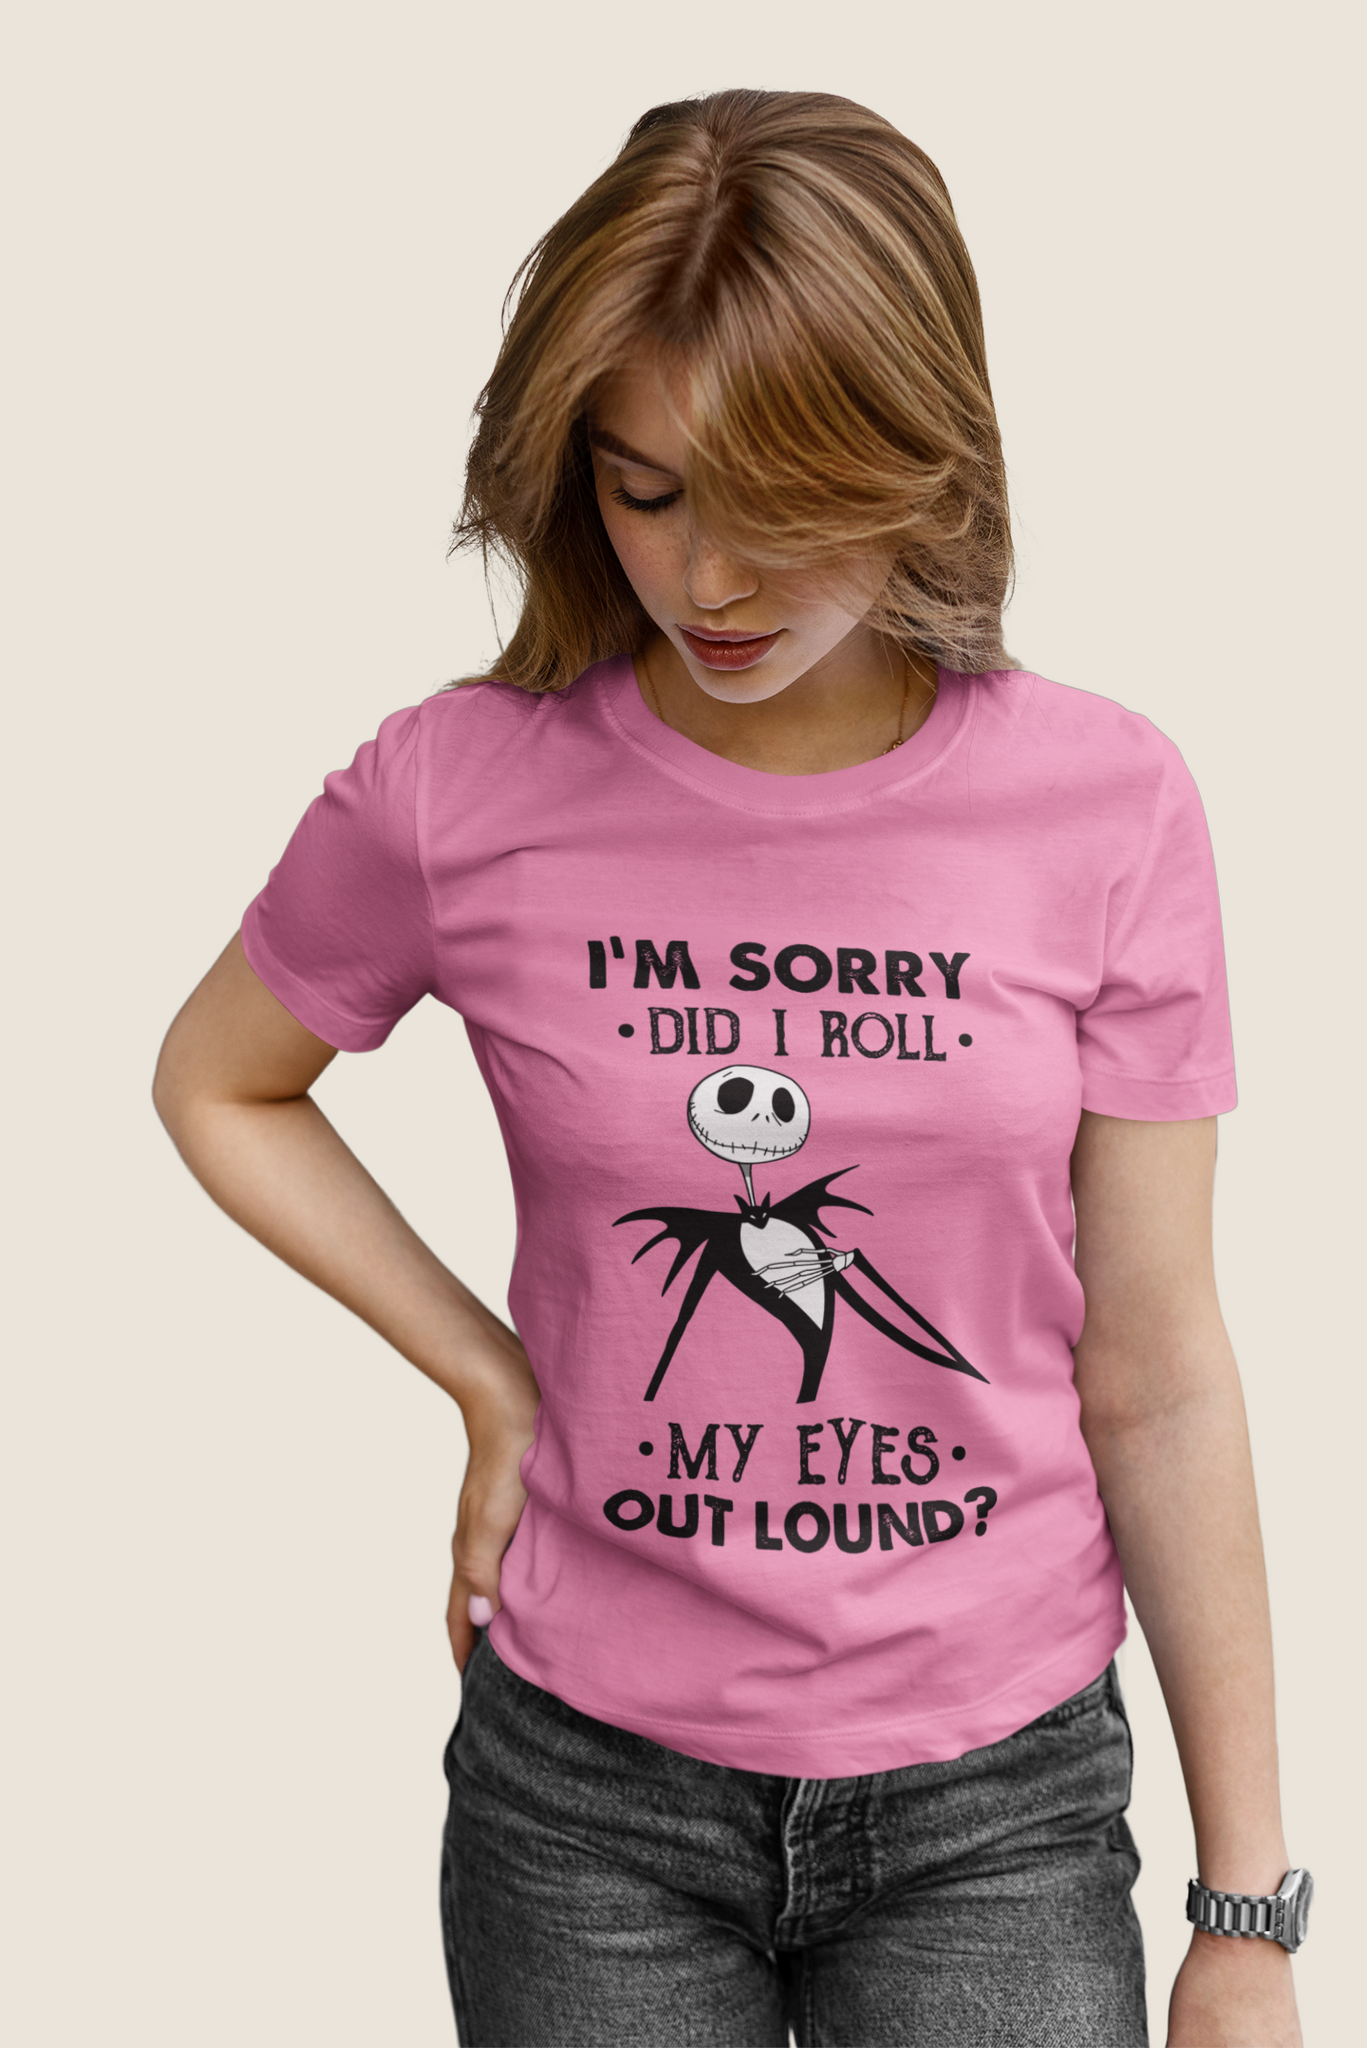 Nightmare Before Christmas T Shirt, Im Sorry Did I Roll My Eyes Out Lound Tshirt, Jack Skellington T Shirt, Halloween Gifts